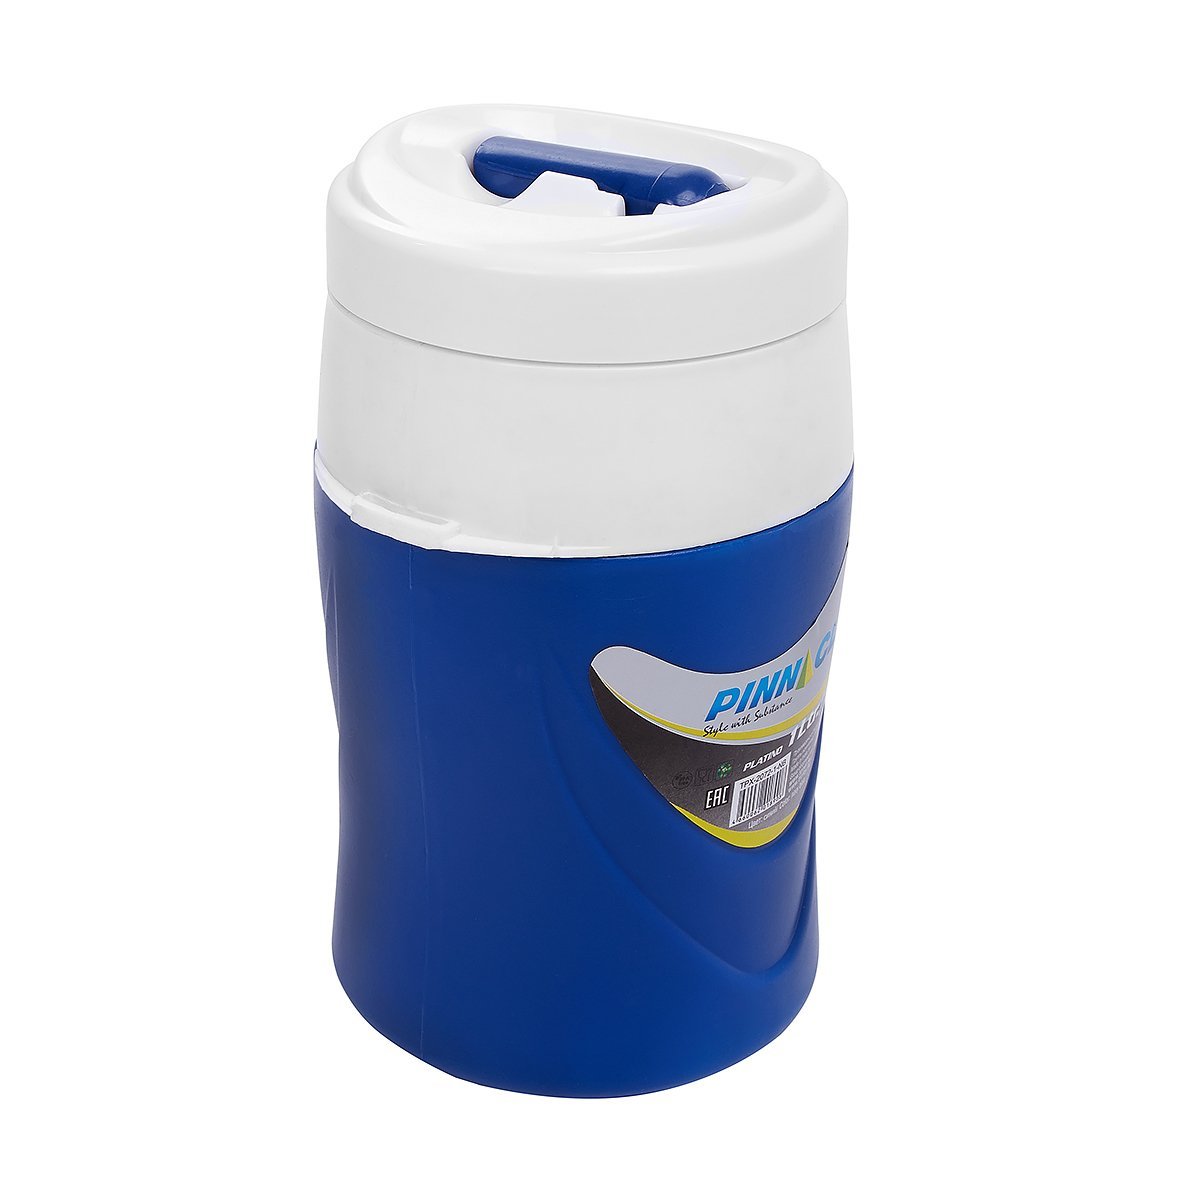 Platino Portable Beverage Cooler Jug for Outdoors and School, 1 qt is equipped with a straw lid and adjustable shoulder strap. Navy blue color.